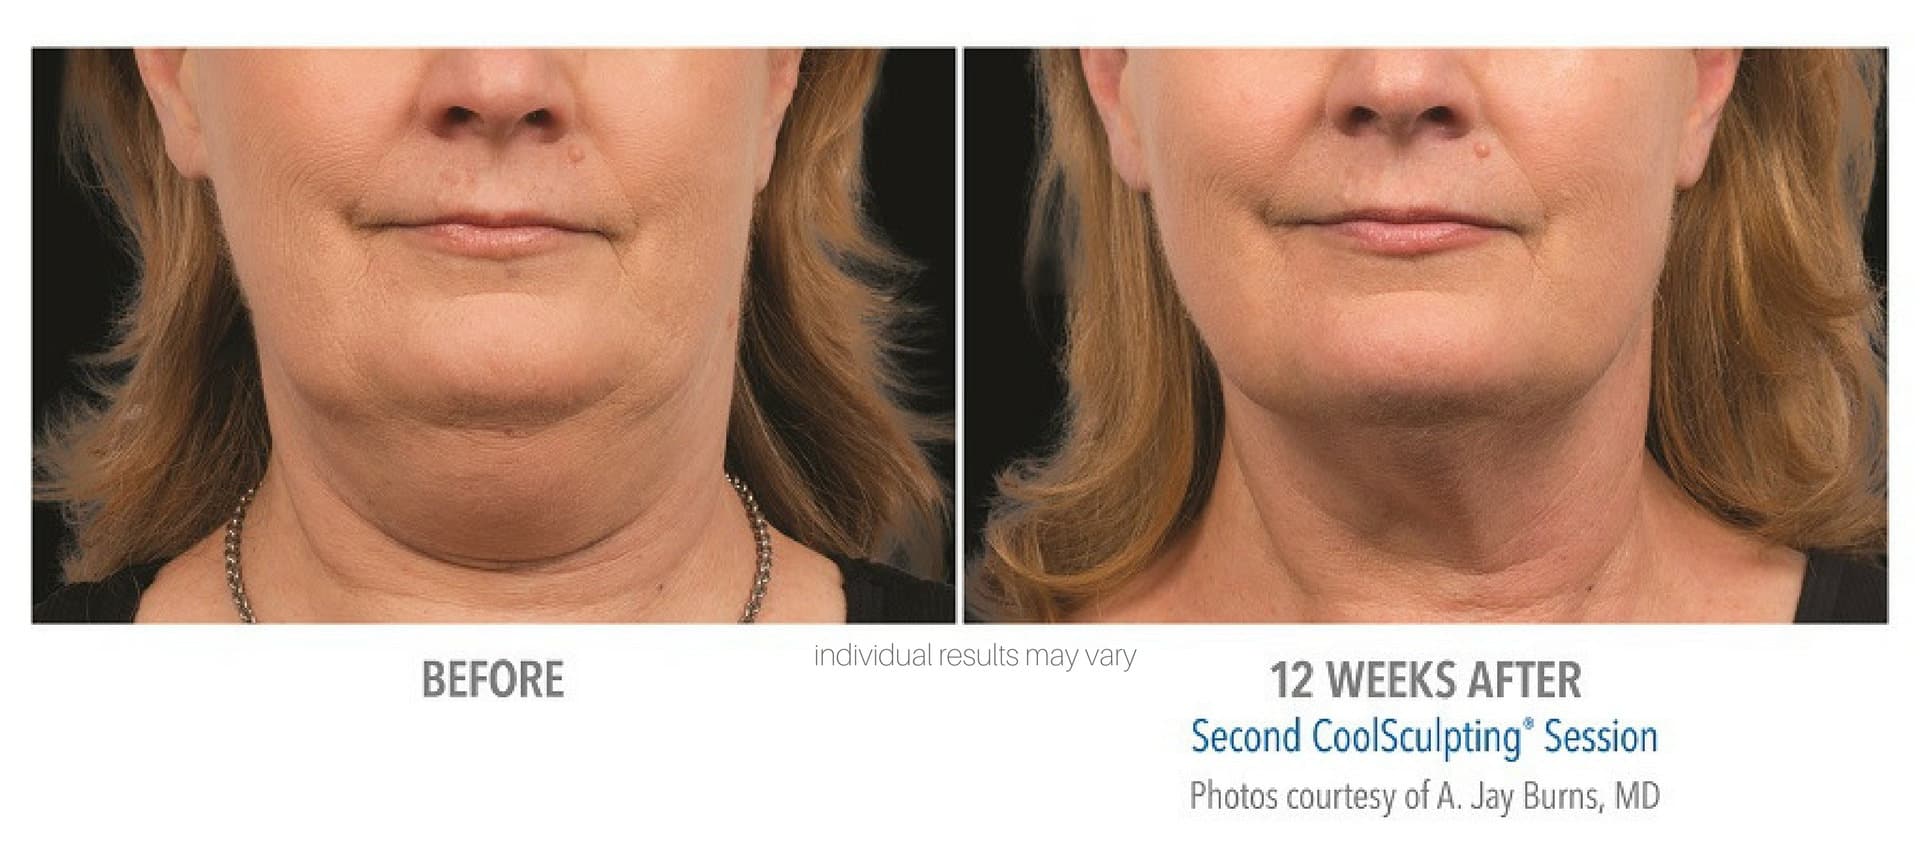 Woman's before and after coolsculpting results from treatment to chin area.